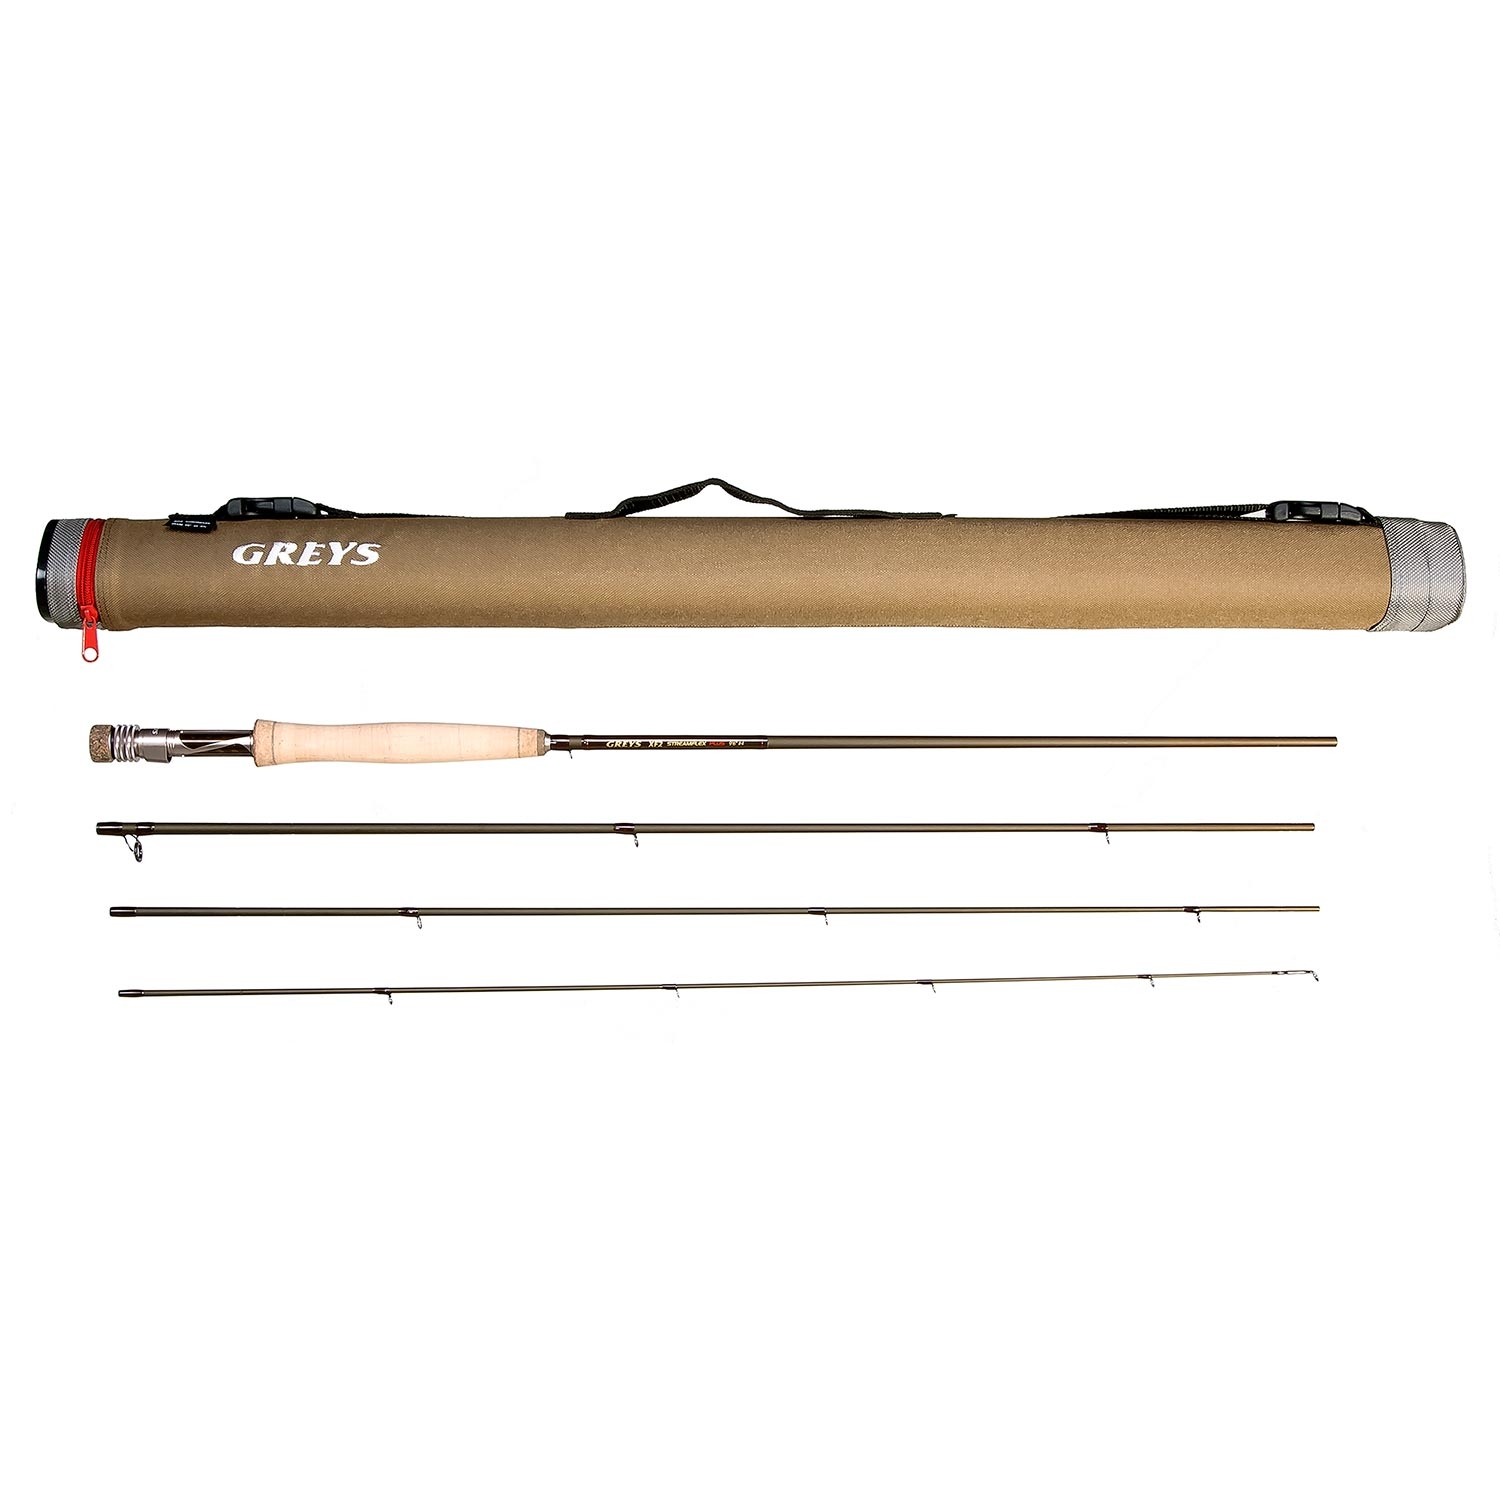 Greys XF2 Streamflex Plus Fly Rod - Single Handed River Fly Fishing Rods